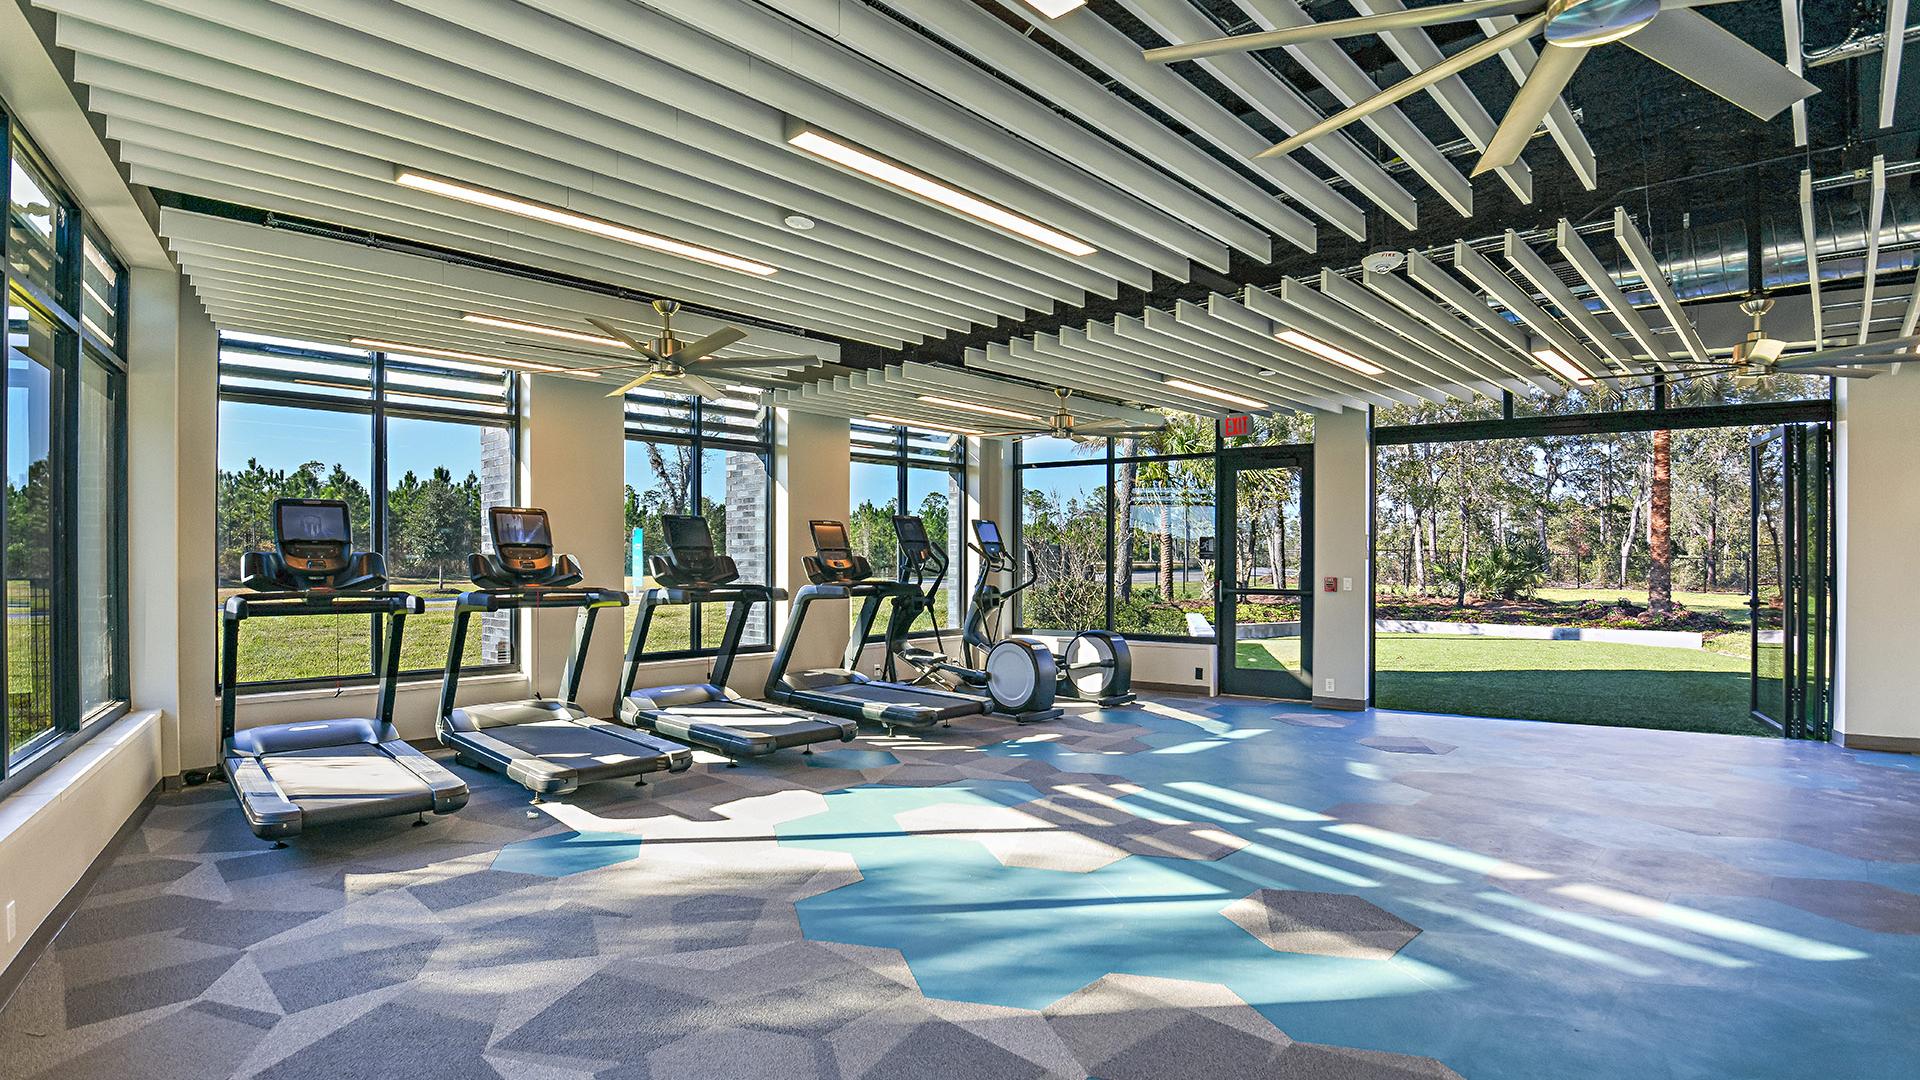 Take advantage of fitness center and clubhouse amenities